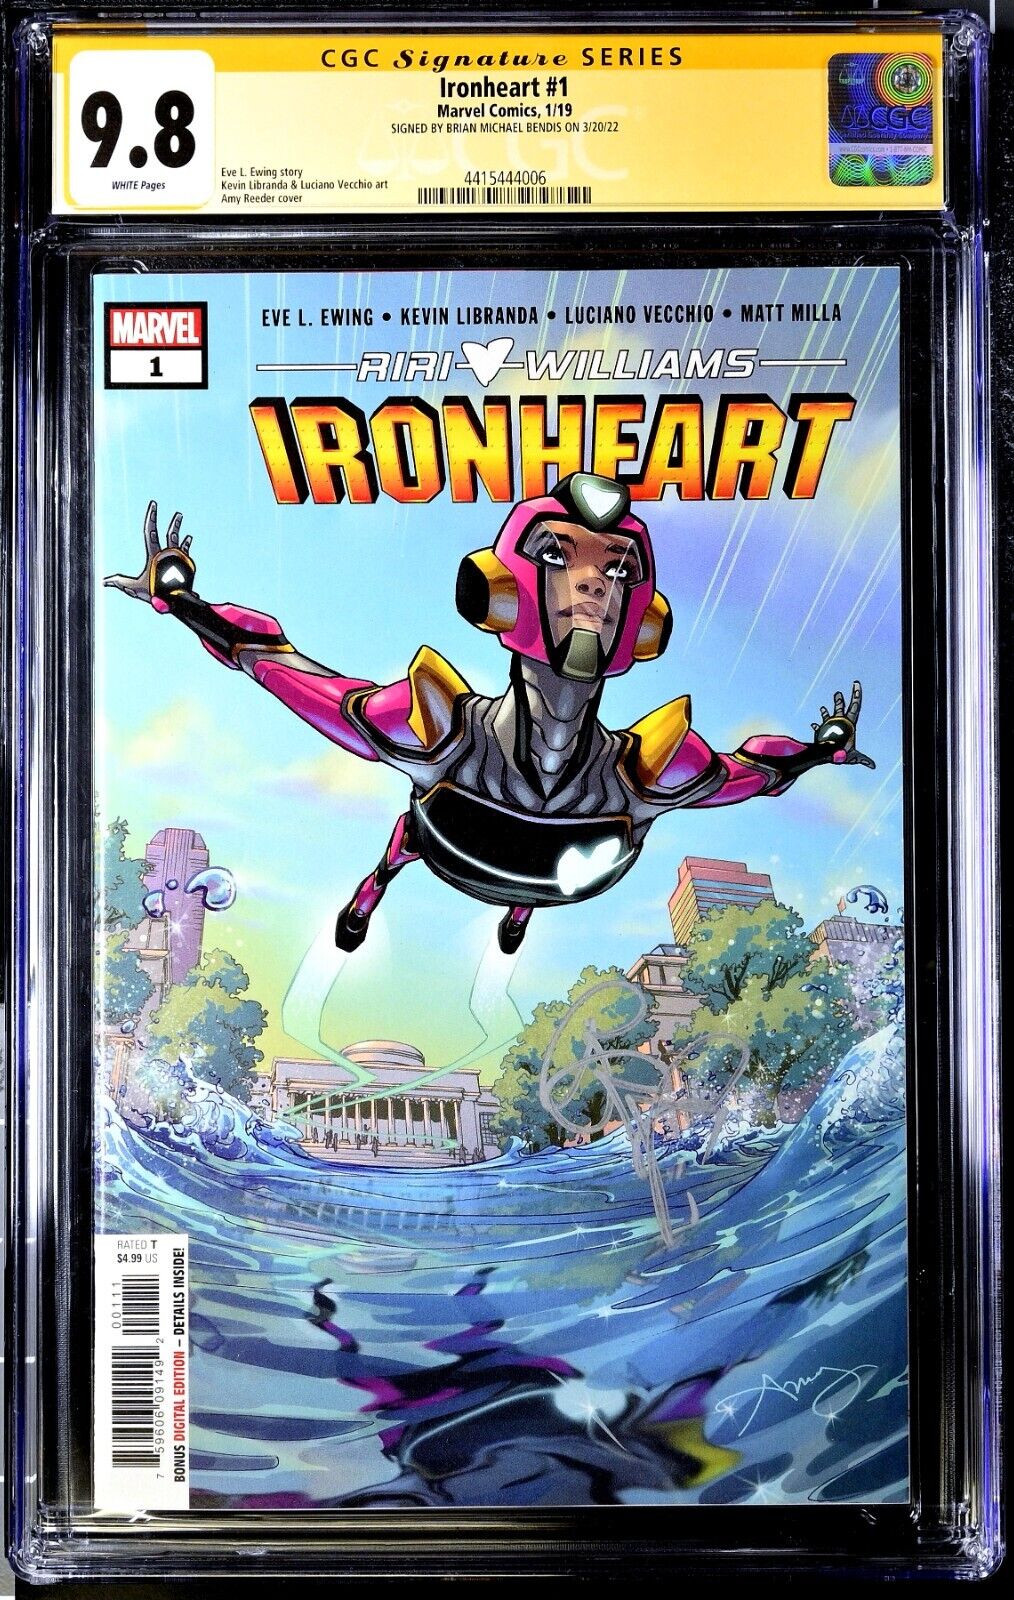 Ironheart #1 (2018) CGC 9.8 NM/MT — Signed by Brian Michael Bendis